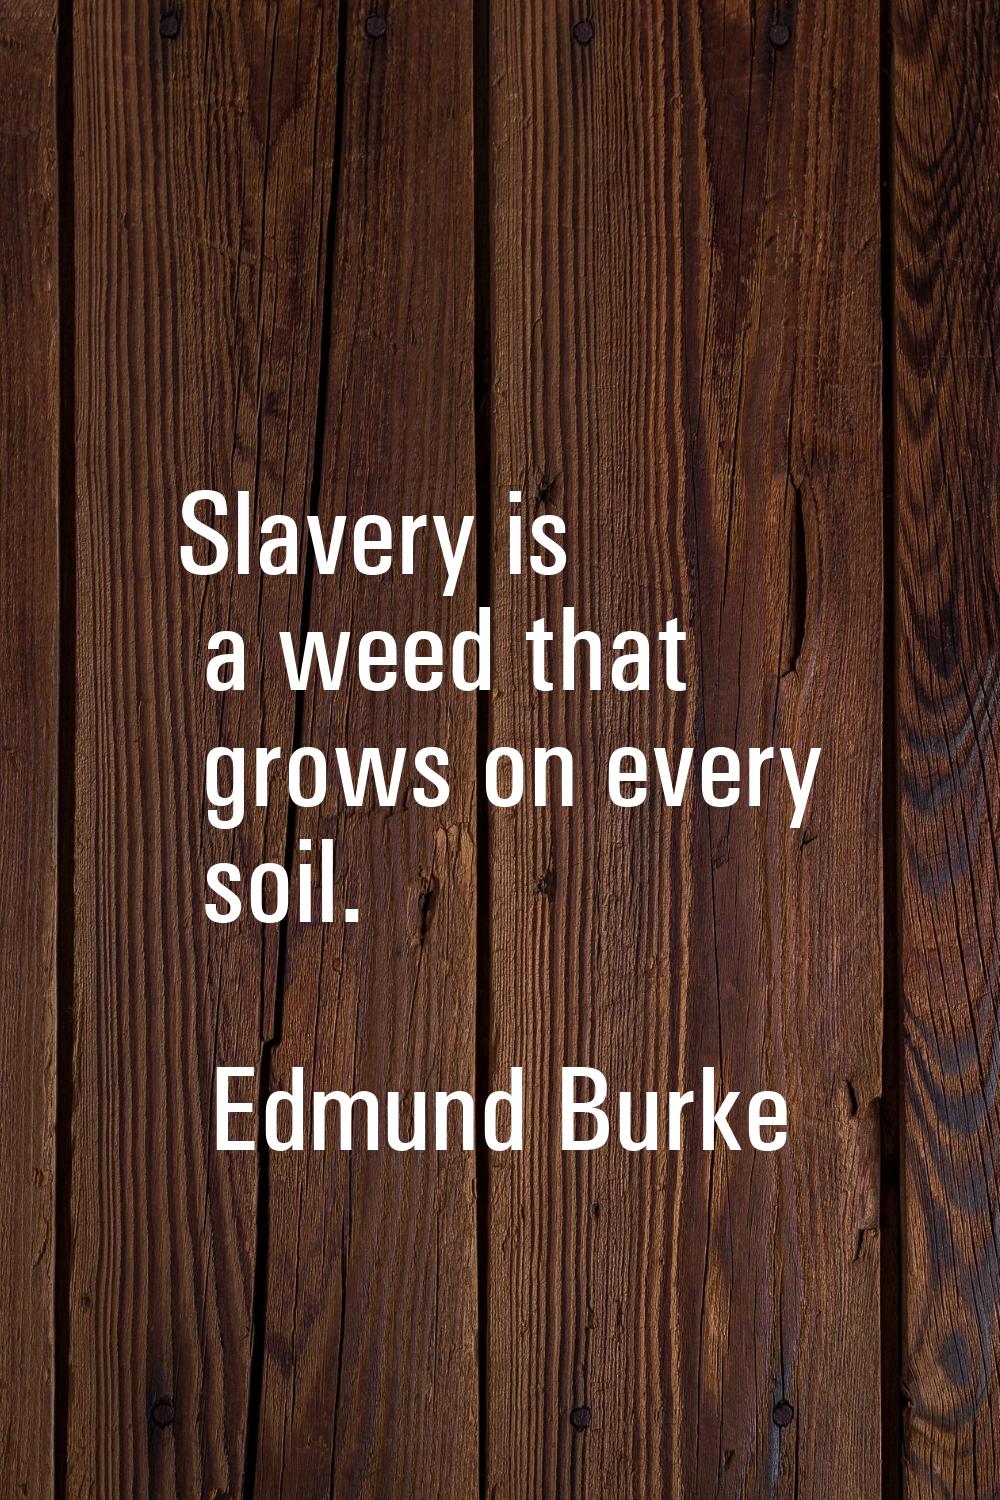 Slavery is a weed that grows on every soil.